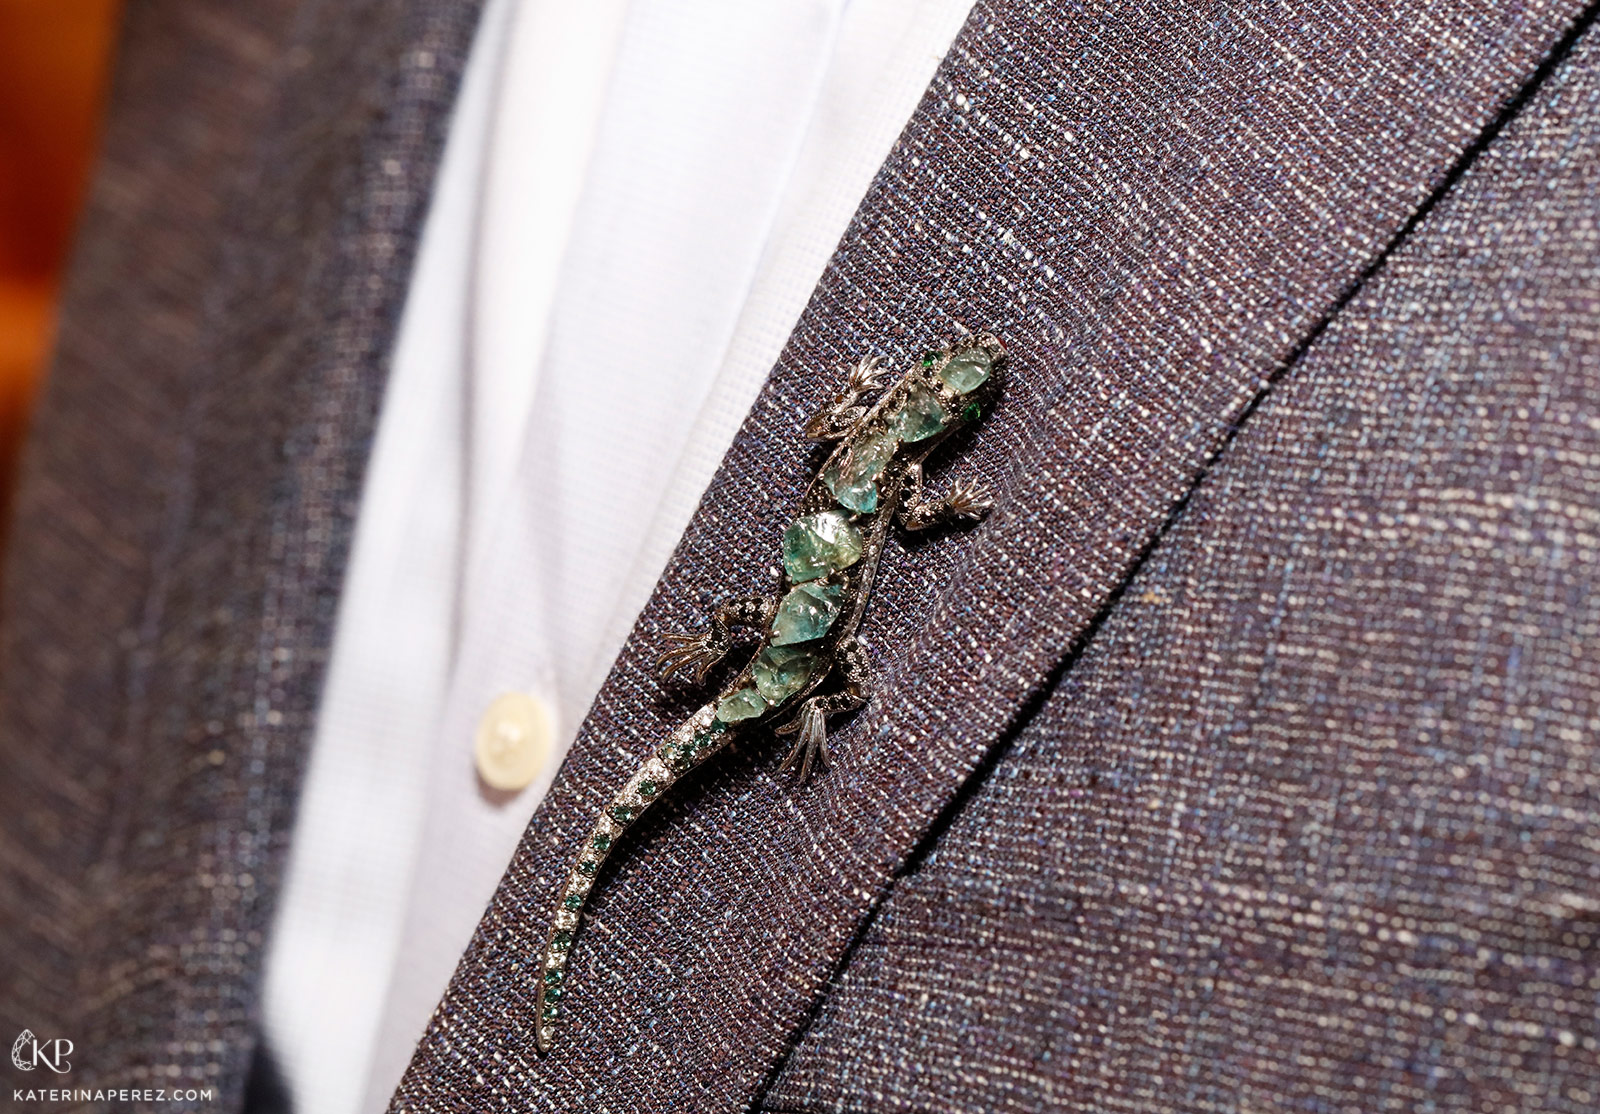 Omi Privé's 'Alexis' the Lizard, in unfaceted alexandrites